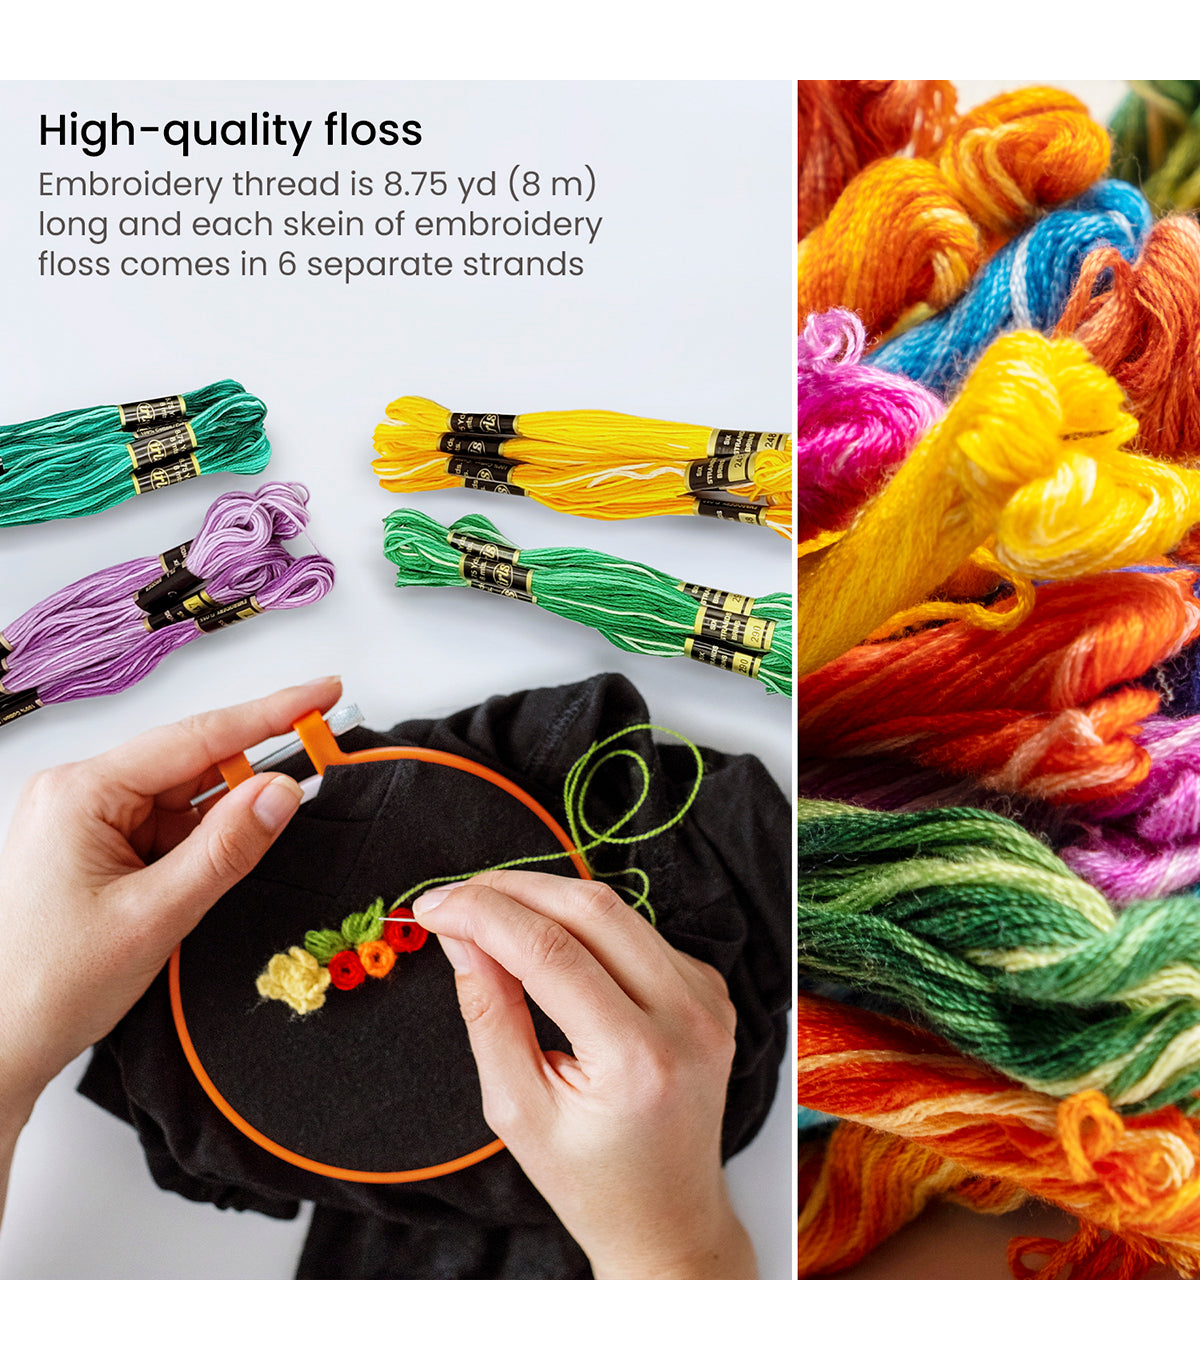 Embroidery Floss - Variegated Color